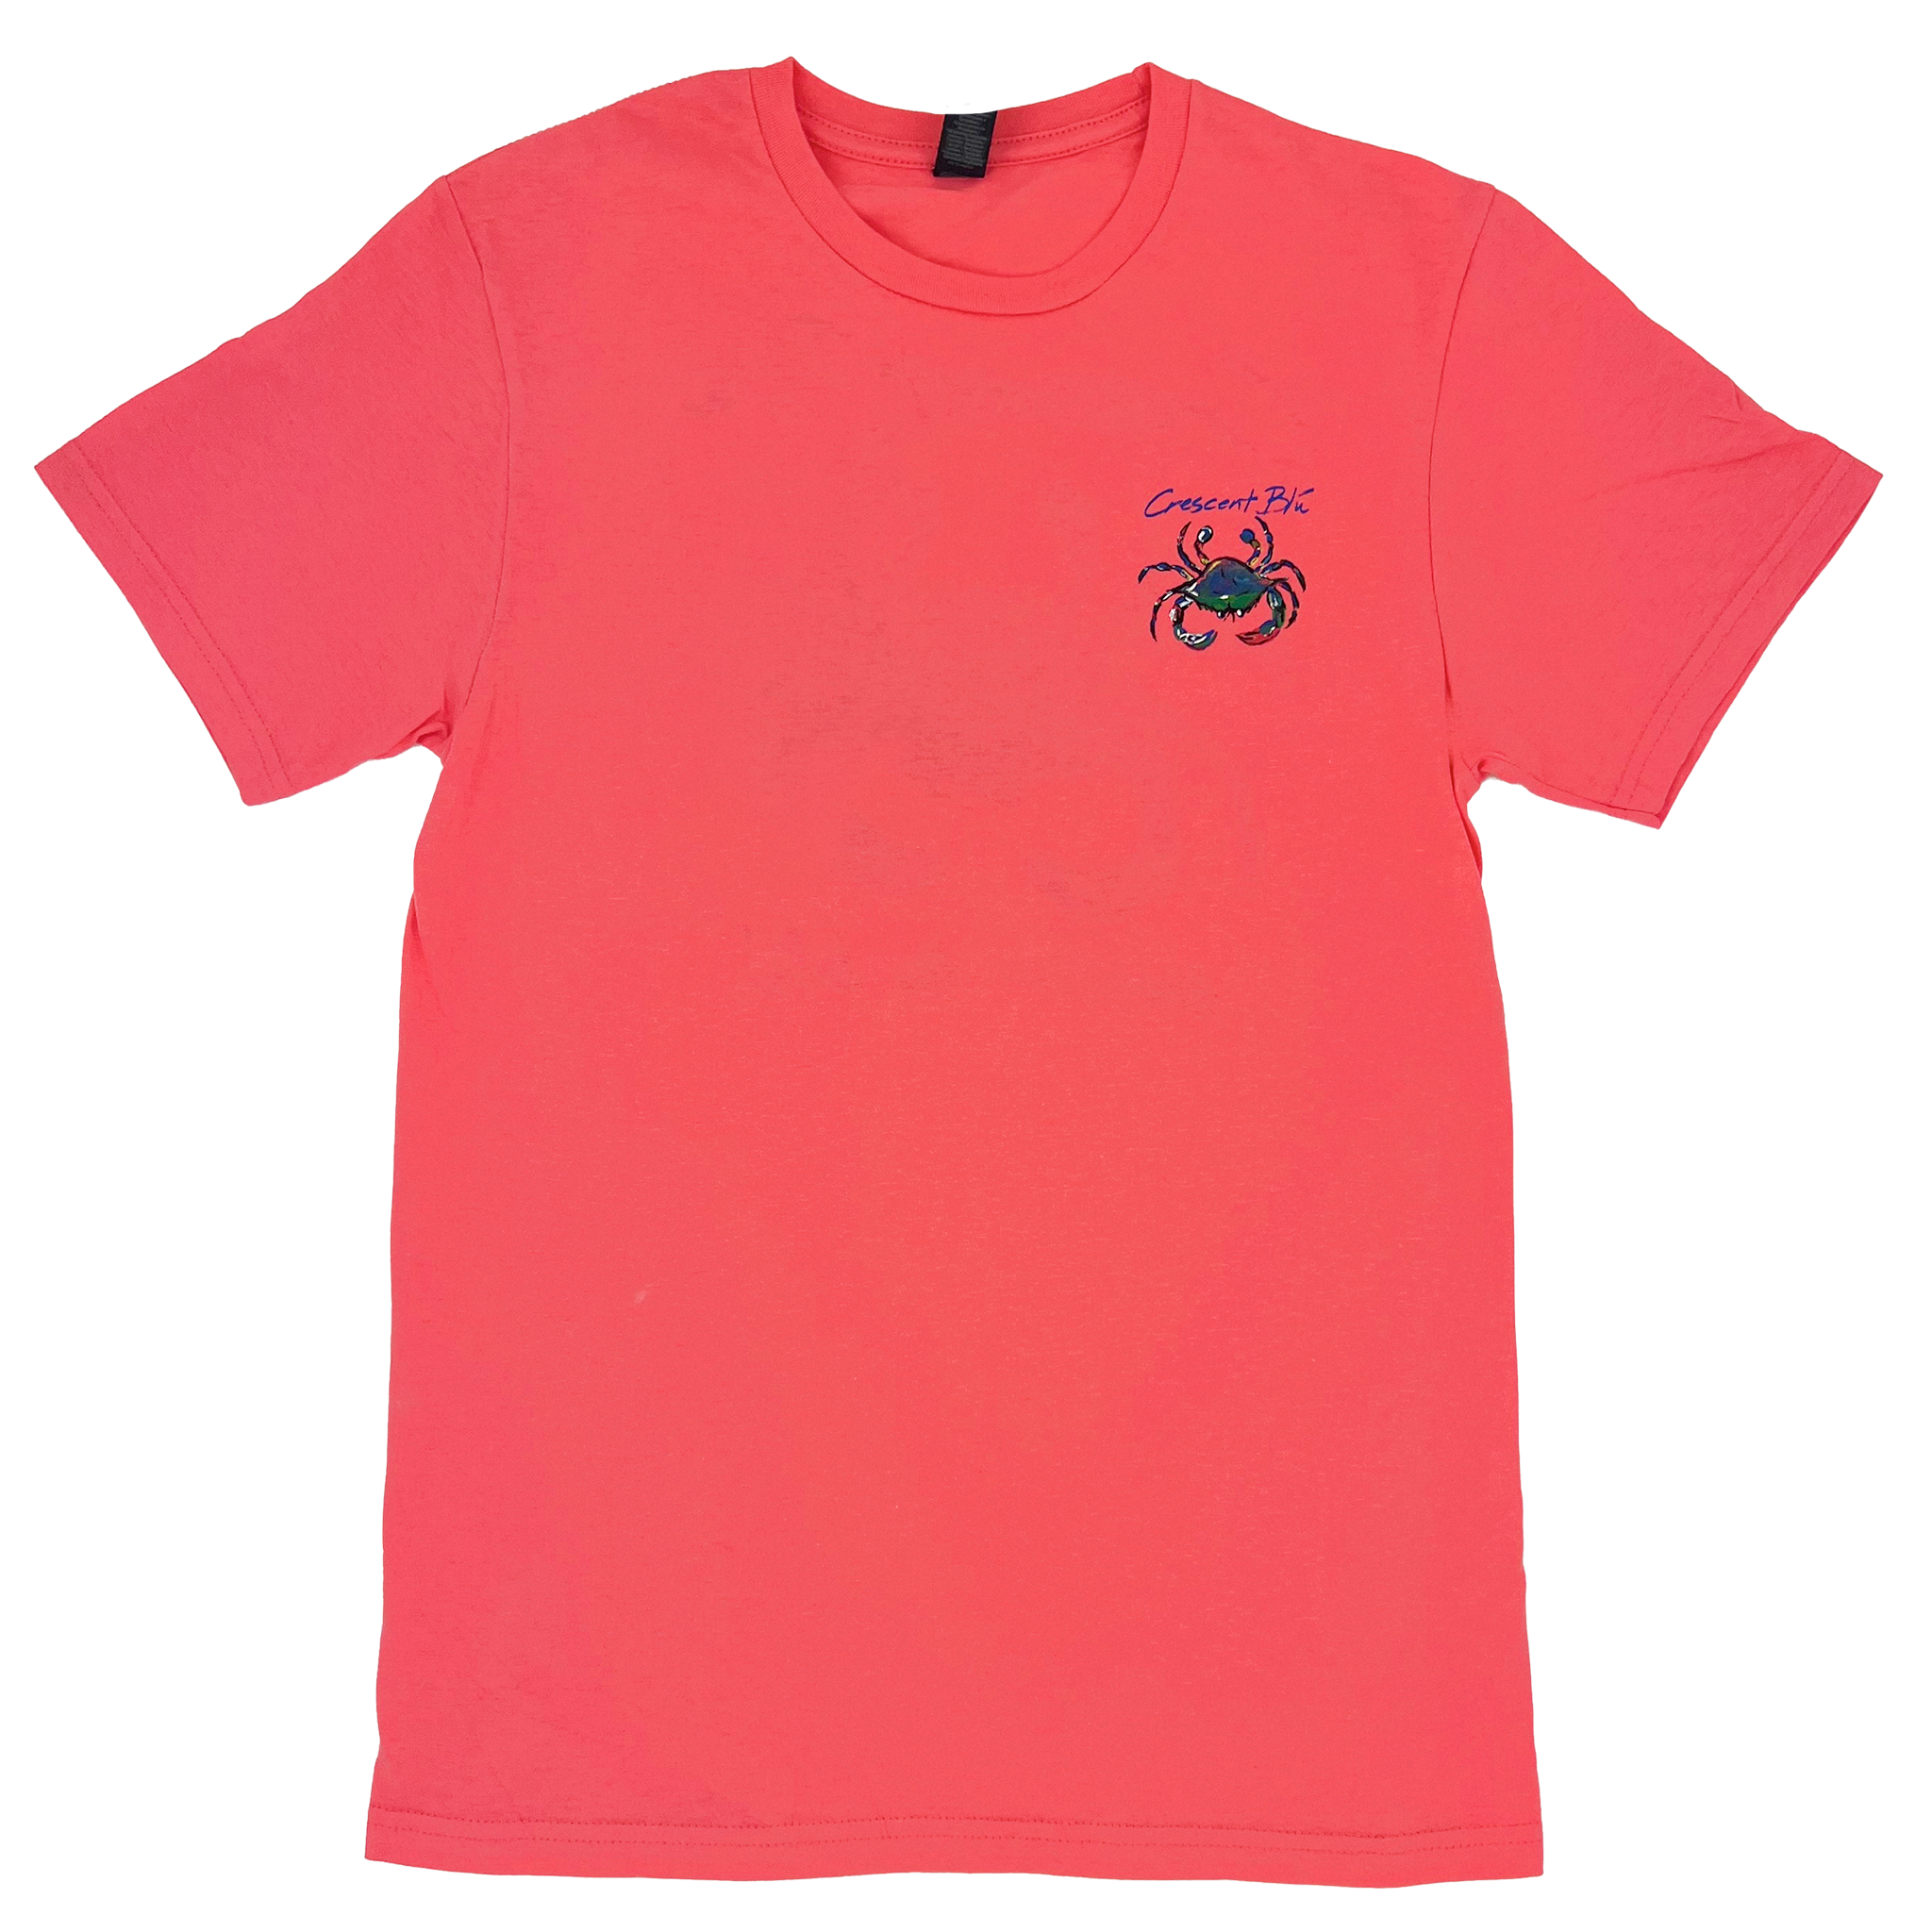 Front view of adult short sleeve shirt with multi-colored Crescent Blu Signature Crab logo on the front left chest. No pocket. Coral Silk colored shirt.